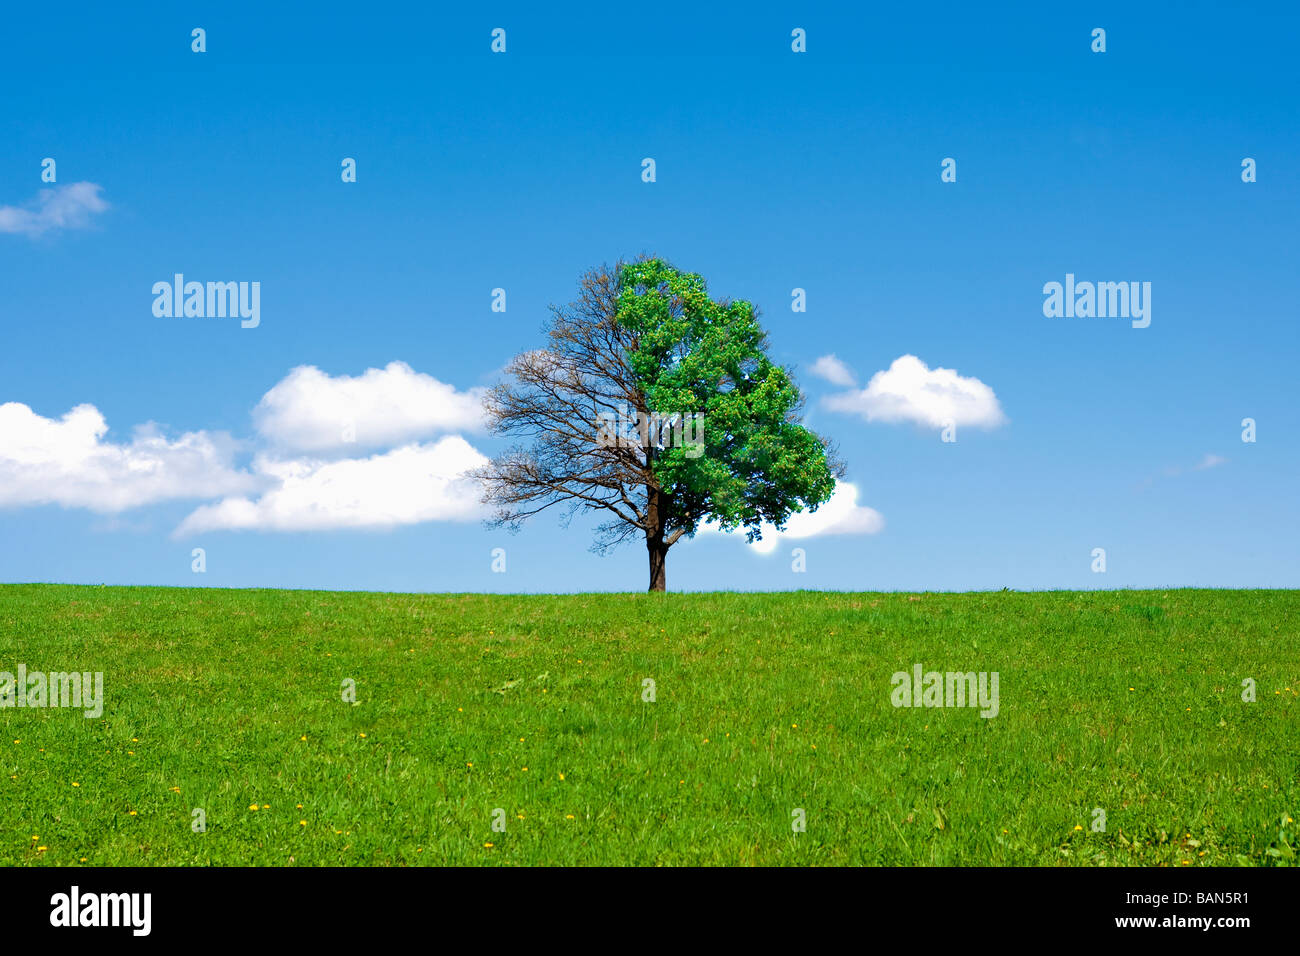 TREE IN FIELD WITH UNEVEN GROWTH Stock Photo